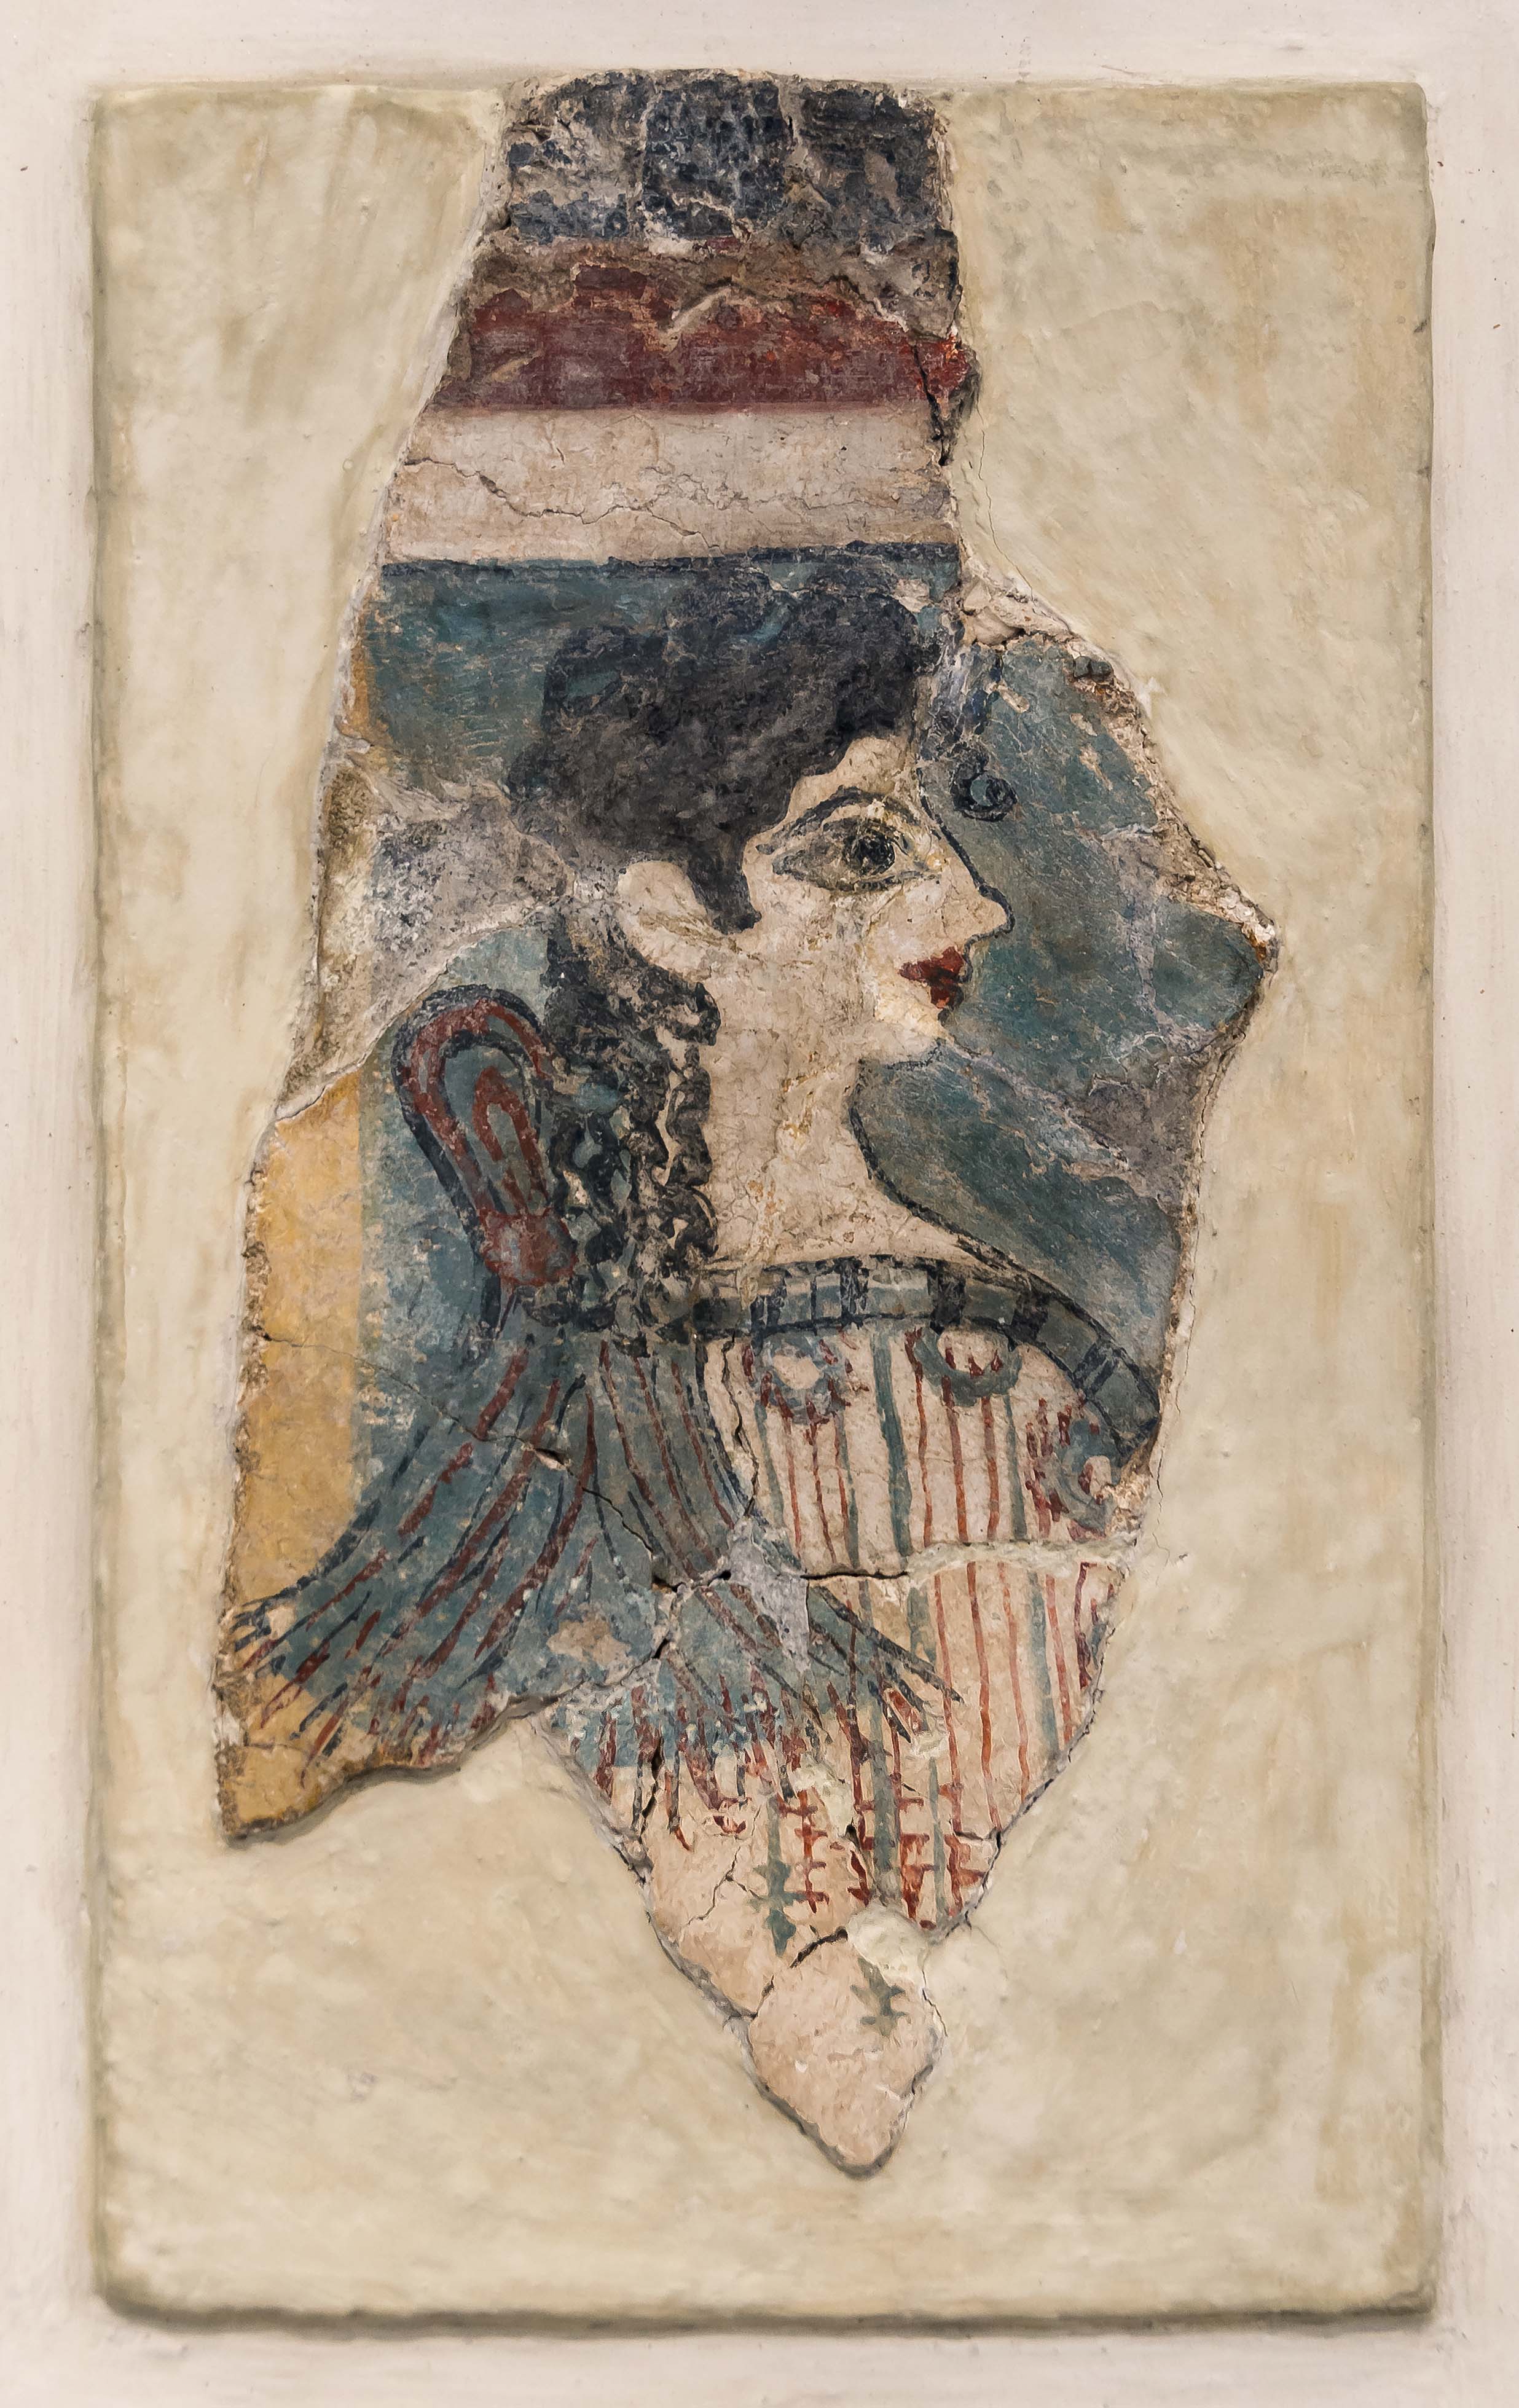 La Parisienne from Knossos palace